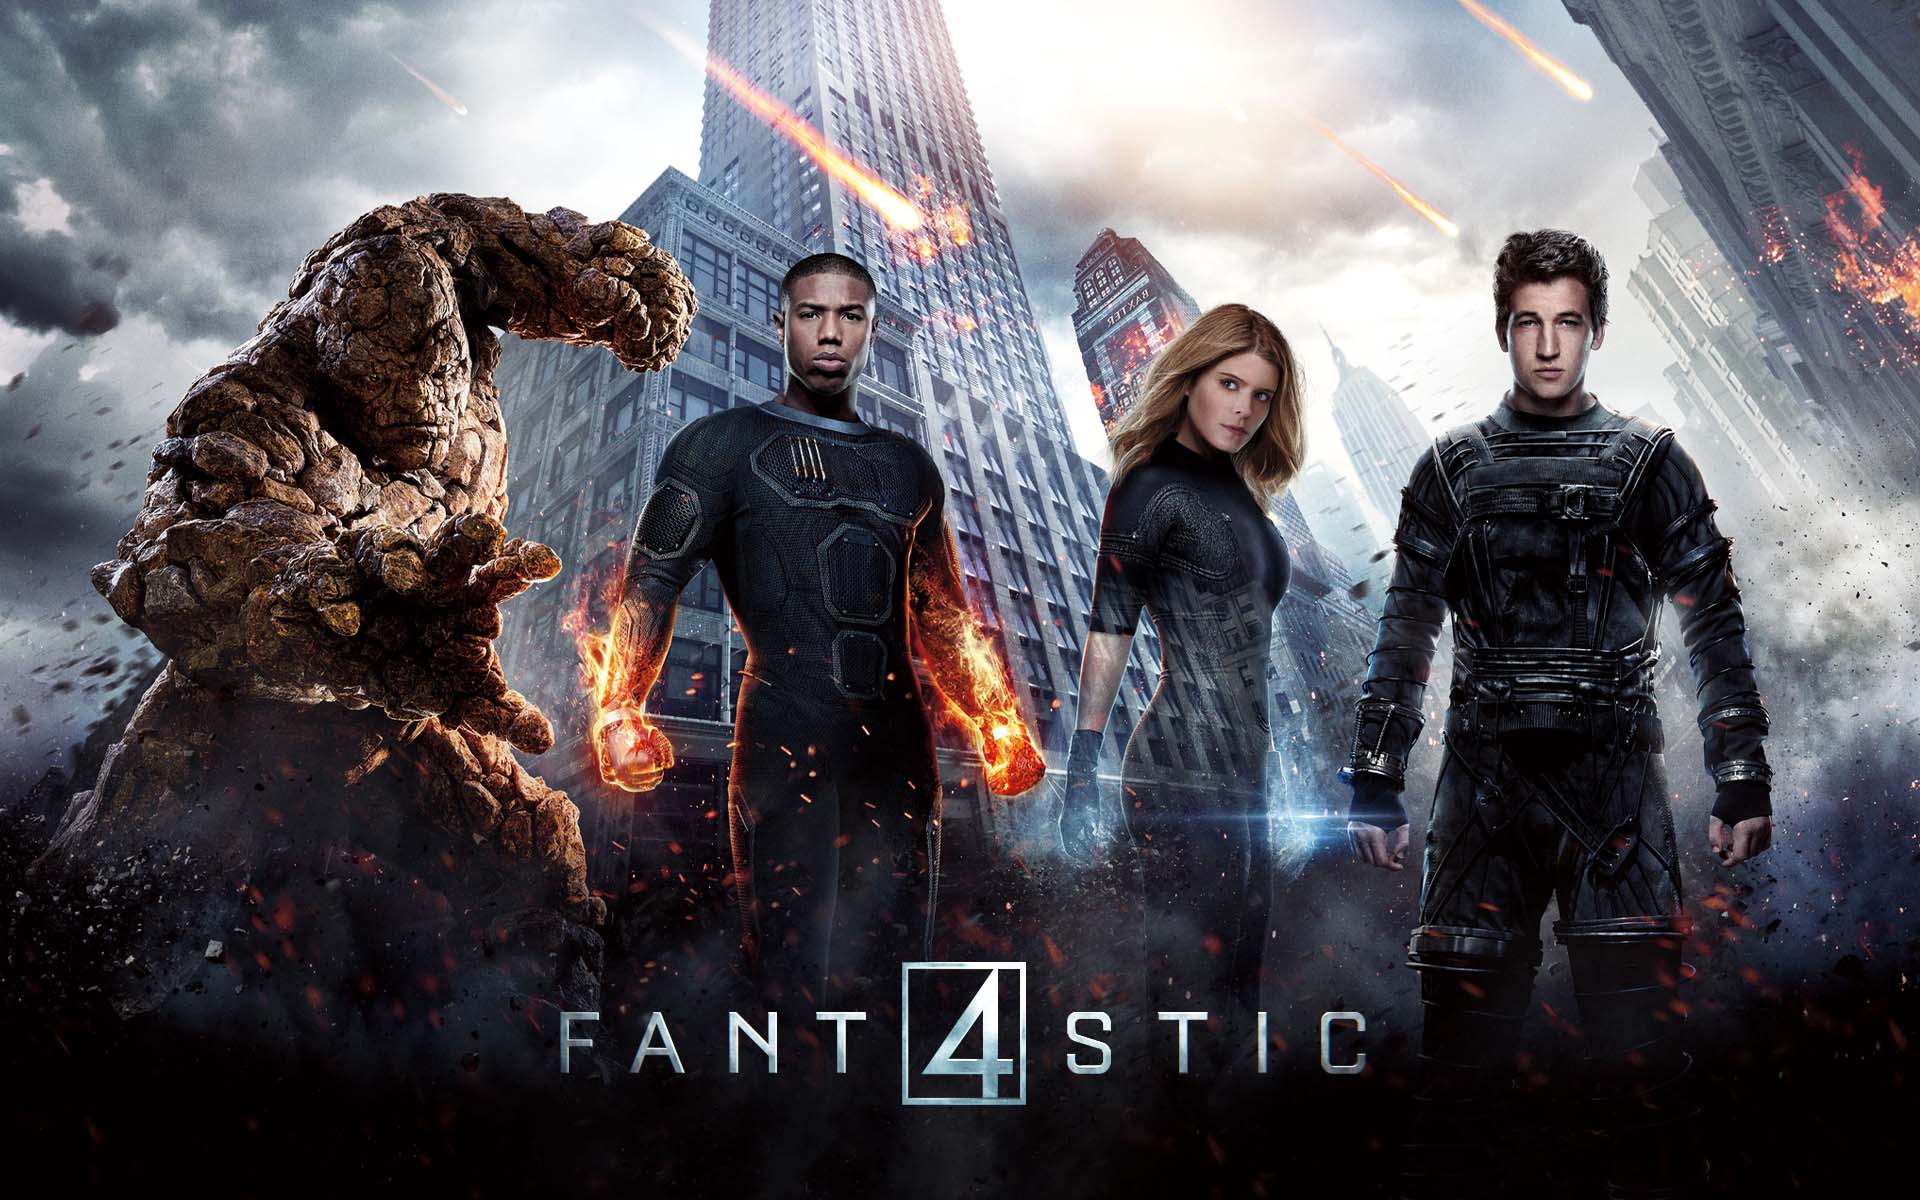 fantastic-four-2015-poster-movie-wallpaper-thing-human-torch-mr-fantastic-invisible-woman.jpg